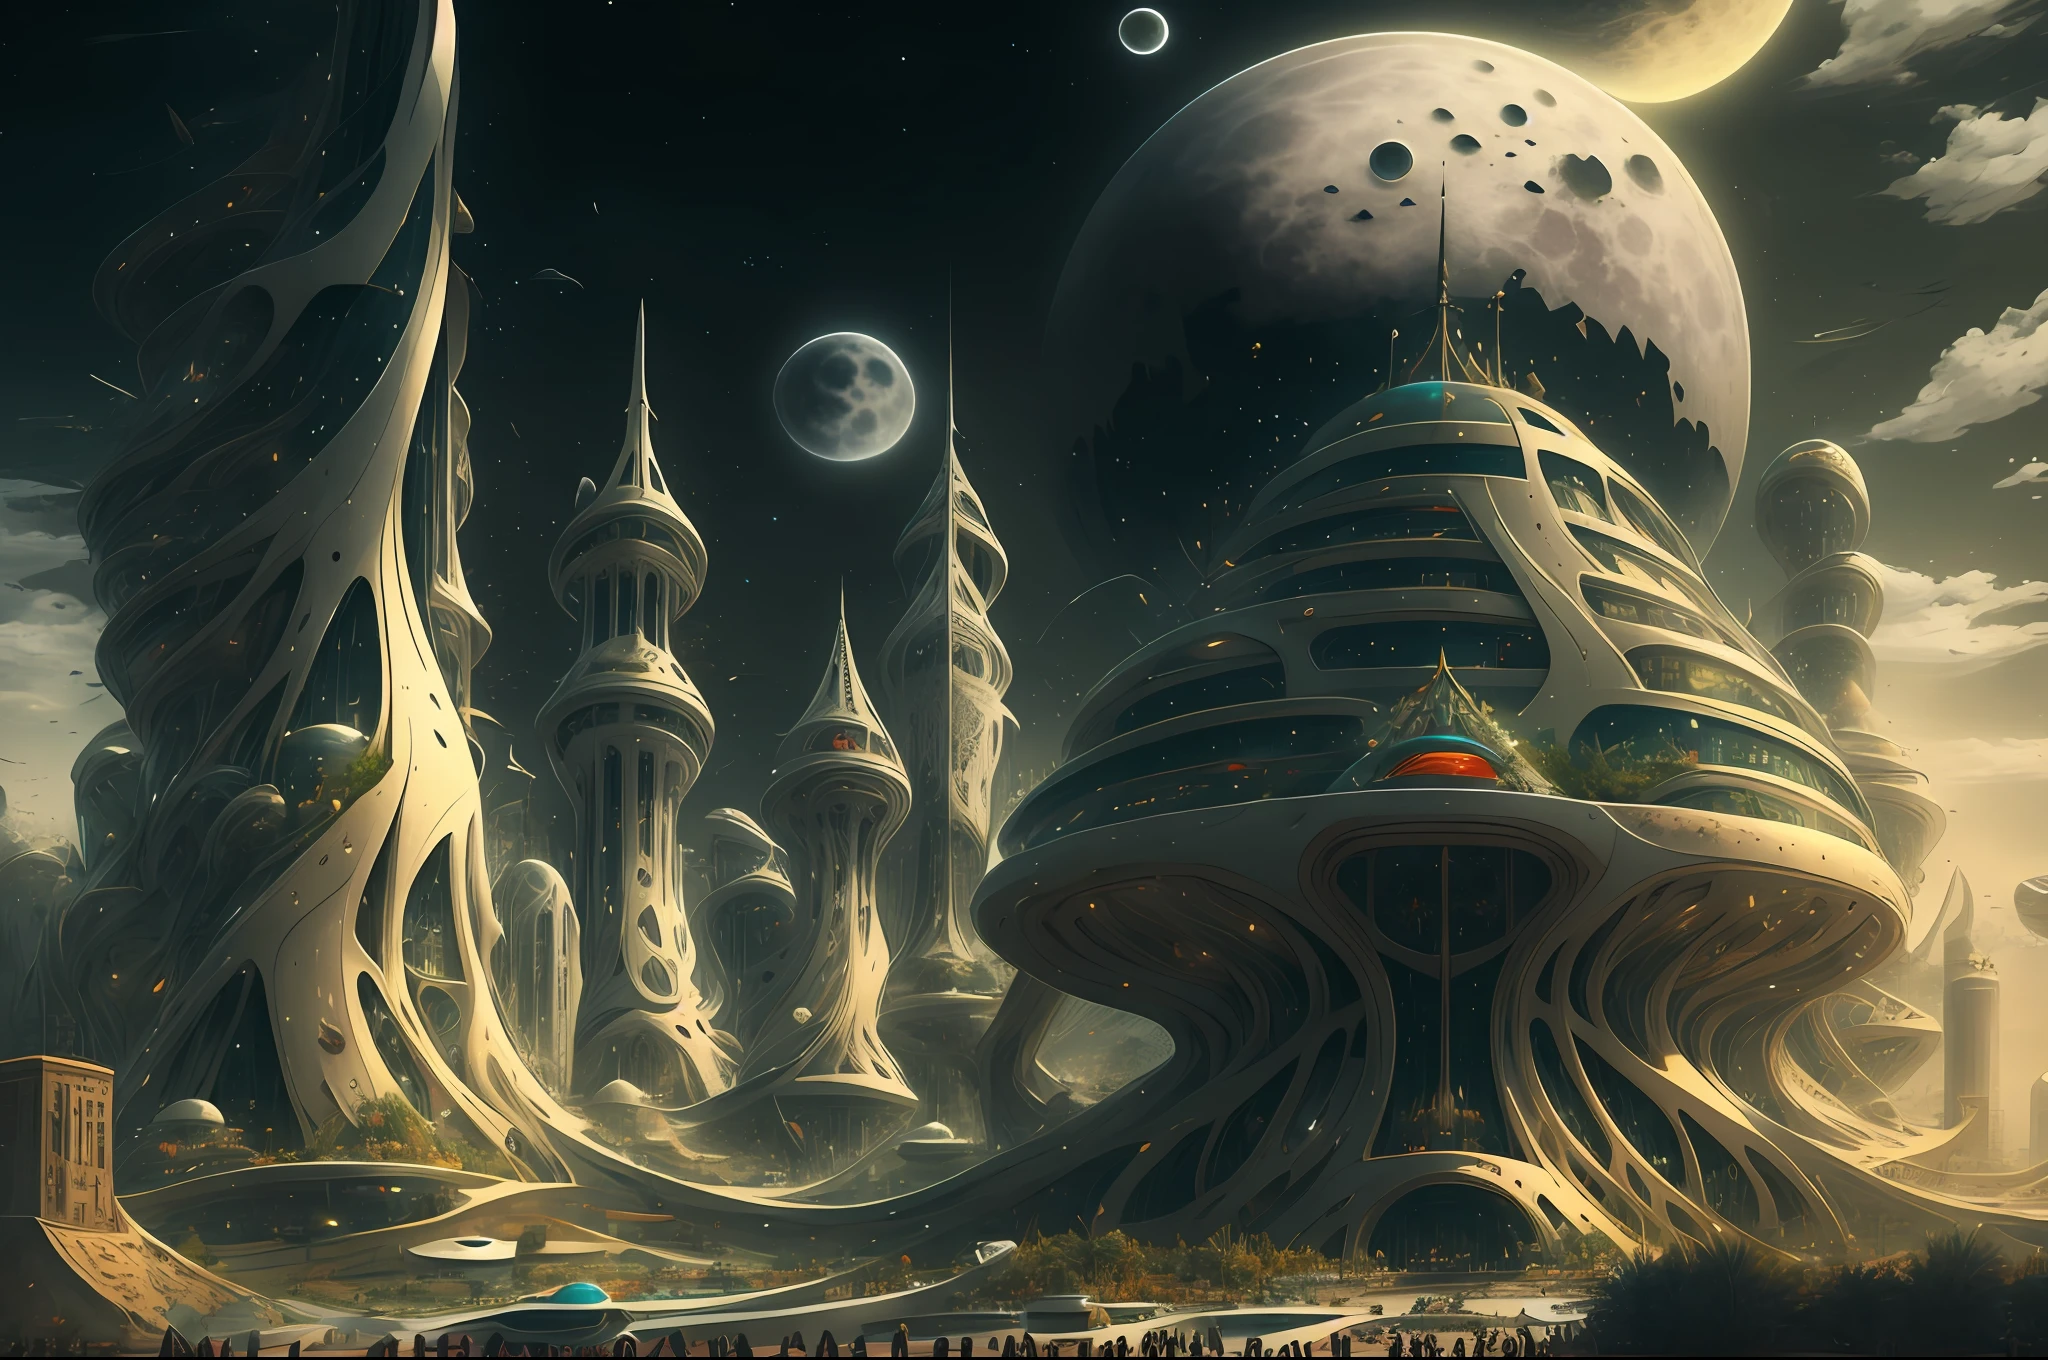 there is a large futuristic masterpiece Arabian palace in the middle of a futuristic arabian city with a moon, in fantasy sci - fi city, sci-fi fantasy wallpaper, masterpiece Quranic art cityscape, epic   Quranic art sci fi illustration, huge futuristic Quranic art city, fantasy scifi, sci-fi fantasy desktop wallpaper, Quranic art city background, in front of a fantasy city, fantasy city, in a castle on an alien planet with masterpiece Quranic art